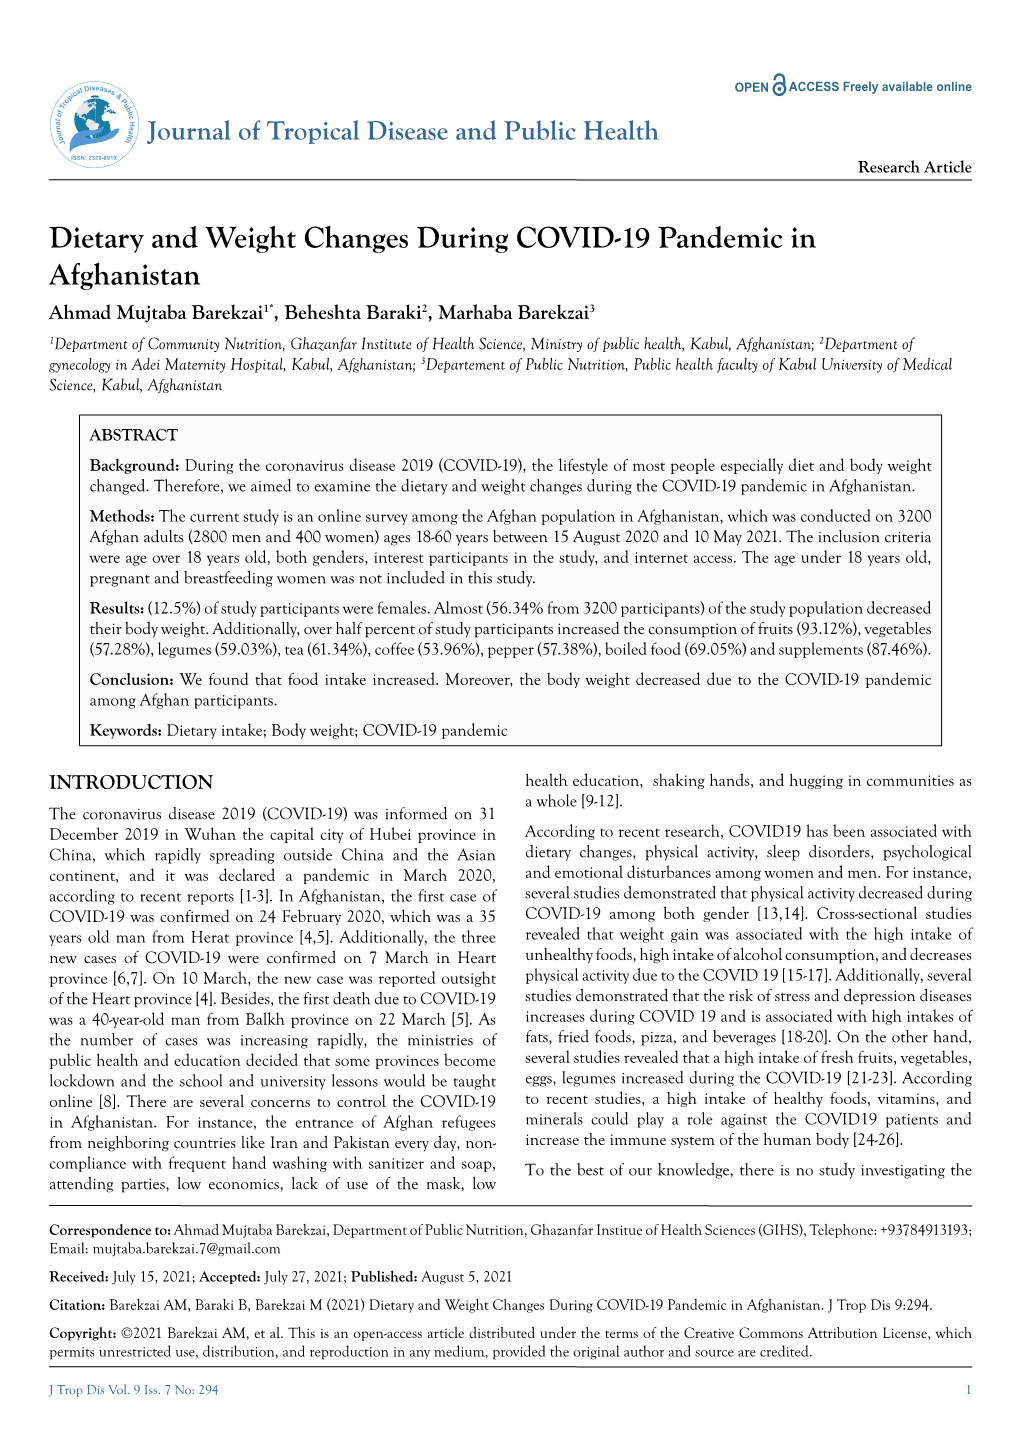 Dietary and Weight Changes During COVID-19 Pandemic in Afghanistan